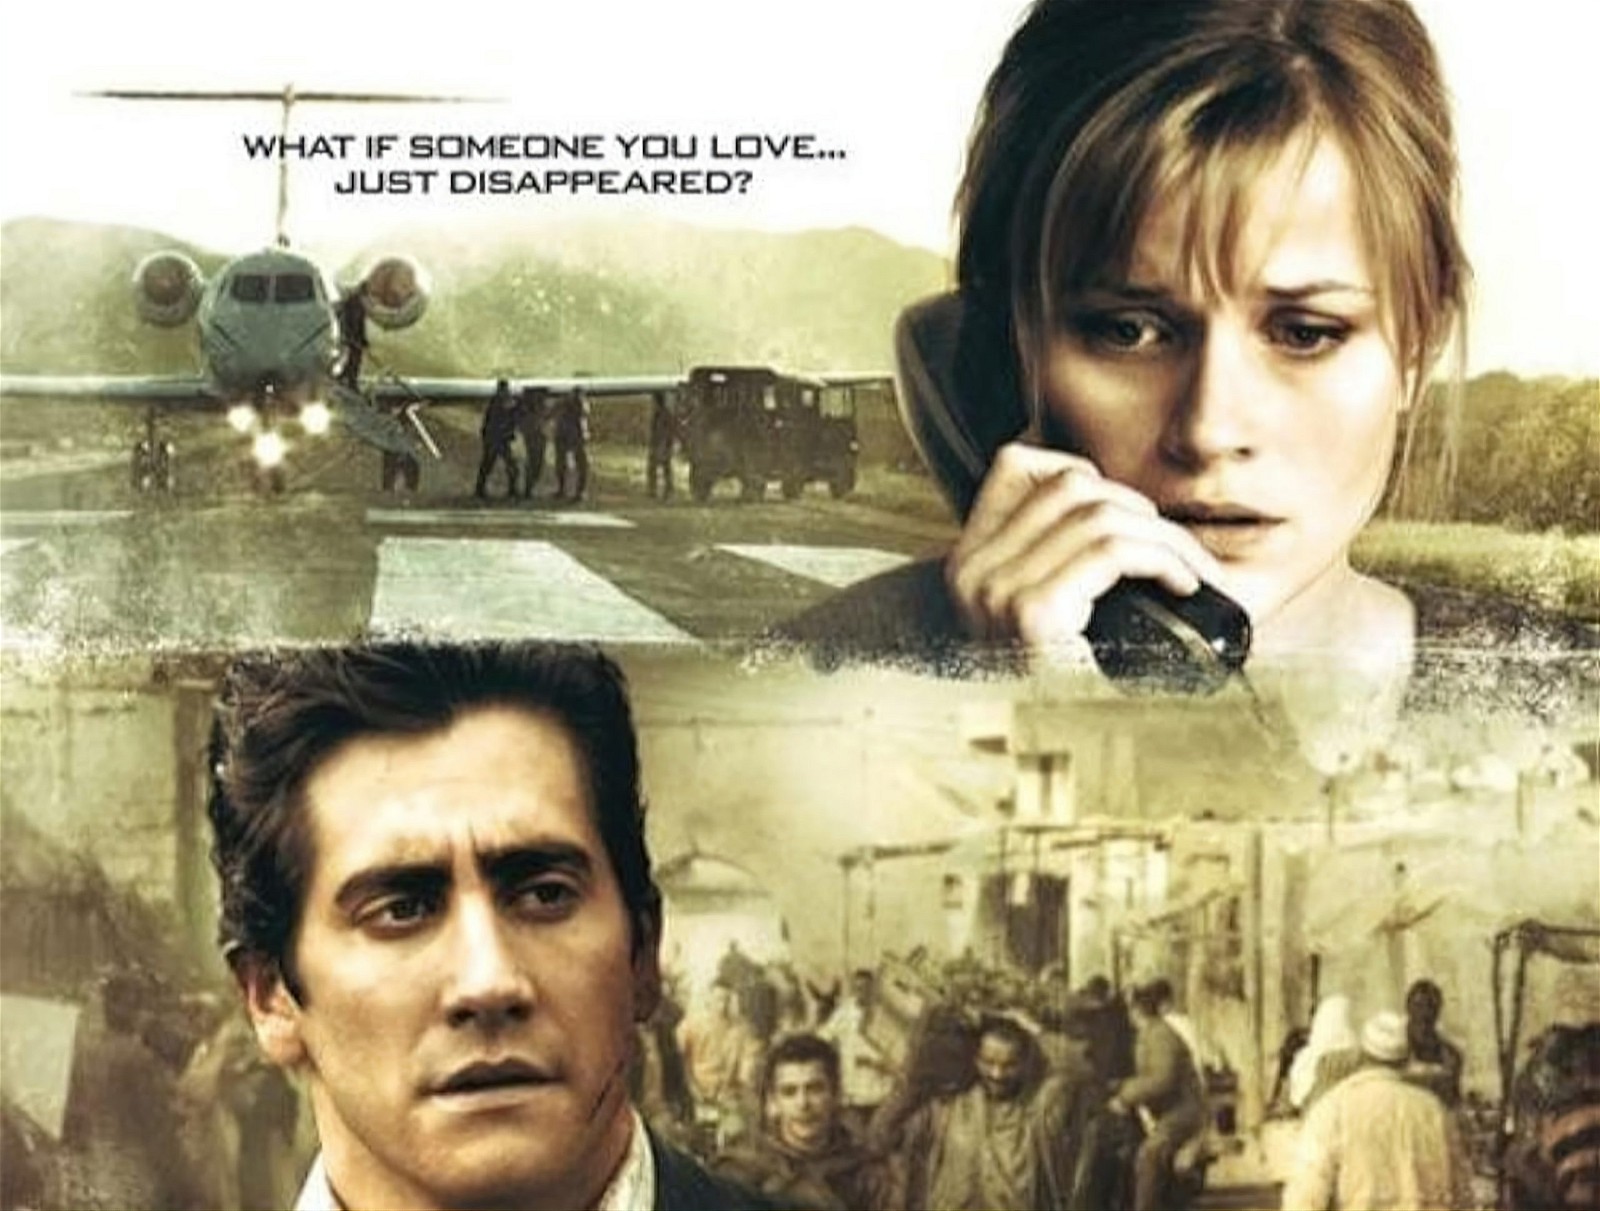 Jake Gyllenhaal and Reese Witherspoon on the poster of Rendition (2007)